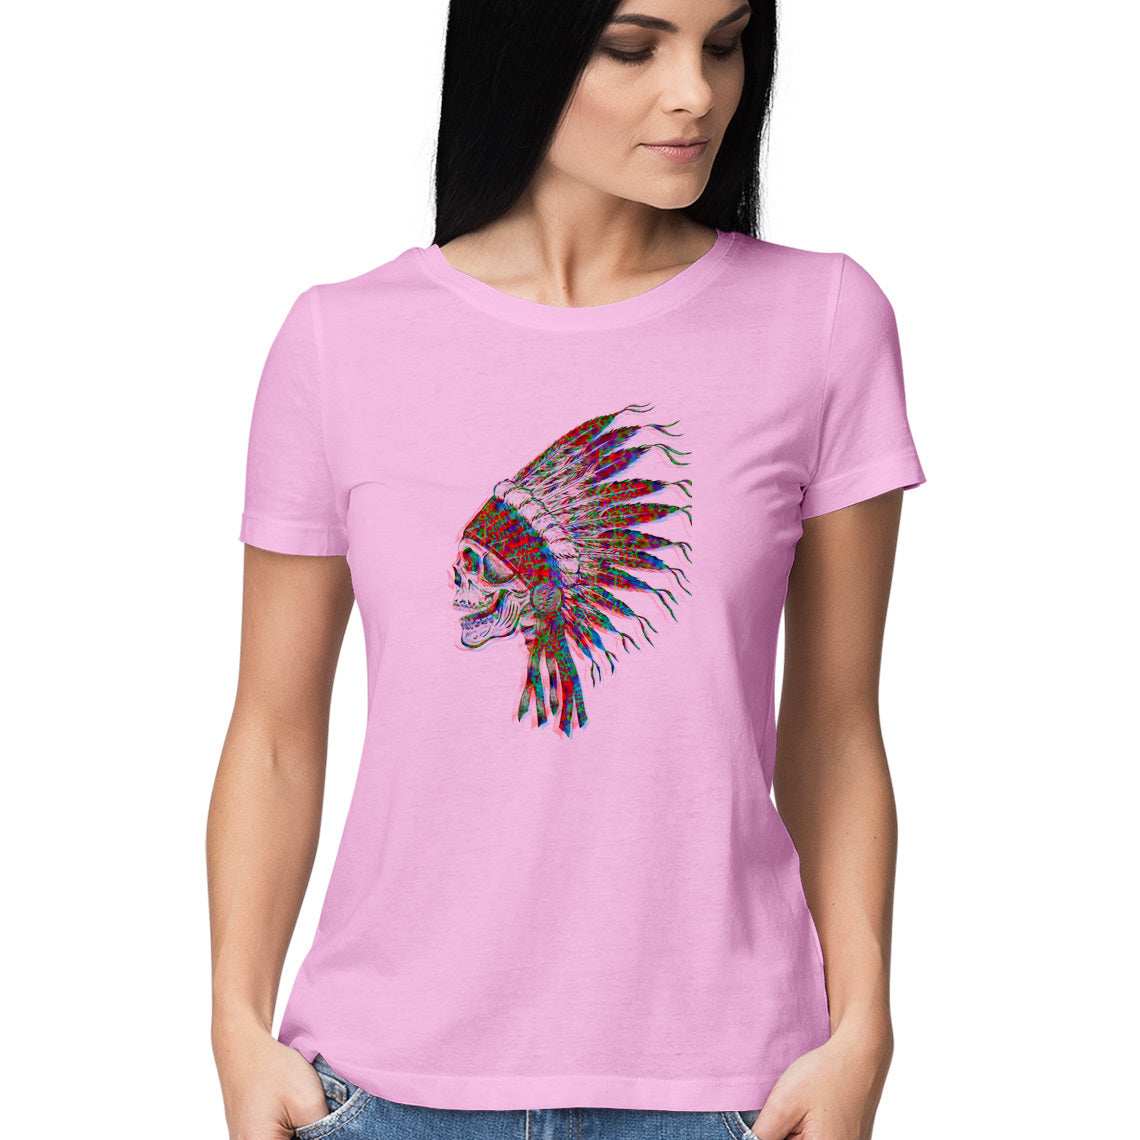 The Cherokee Rising from beyond the Grave Women's T-Shirt - CBD Store India